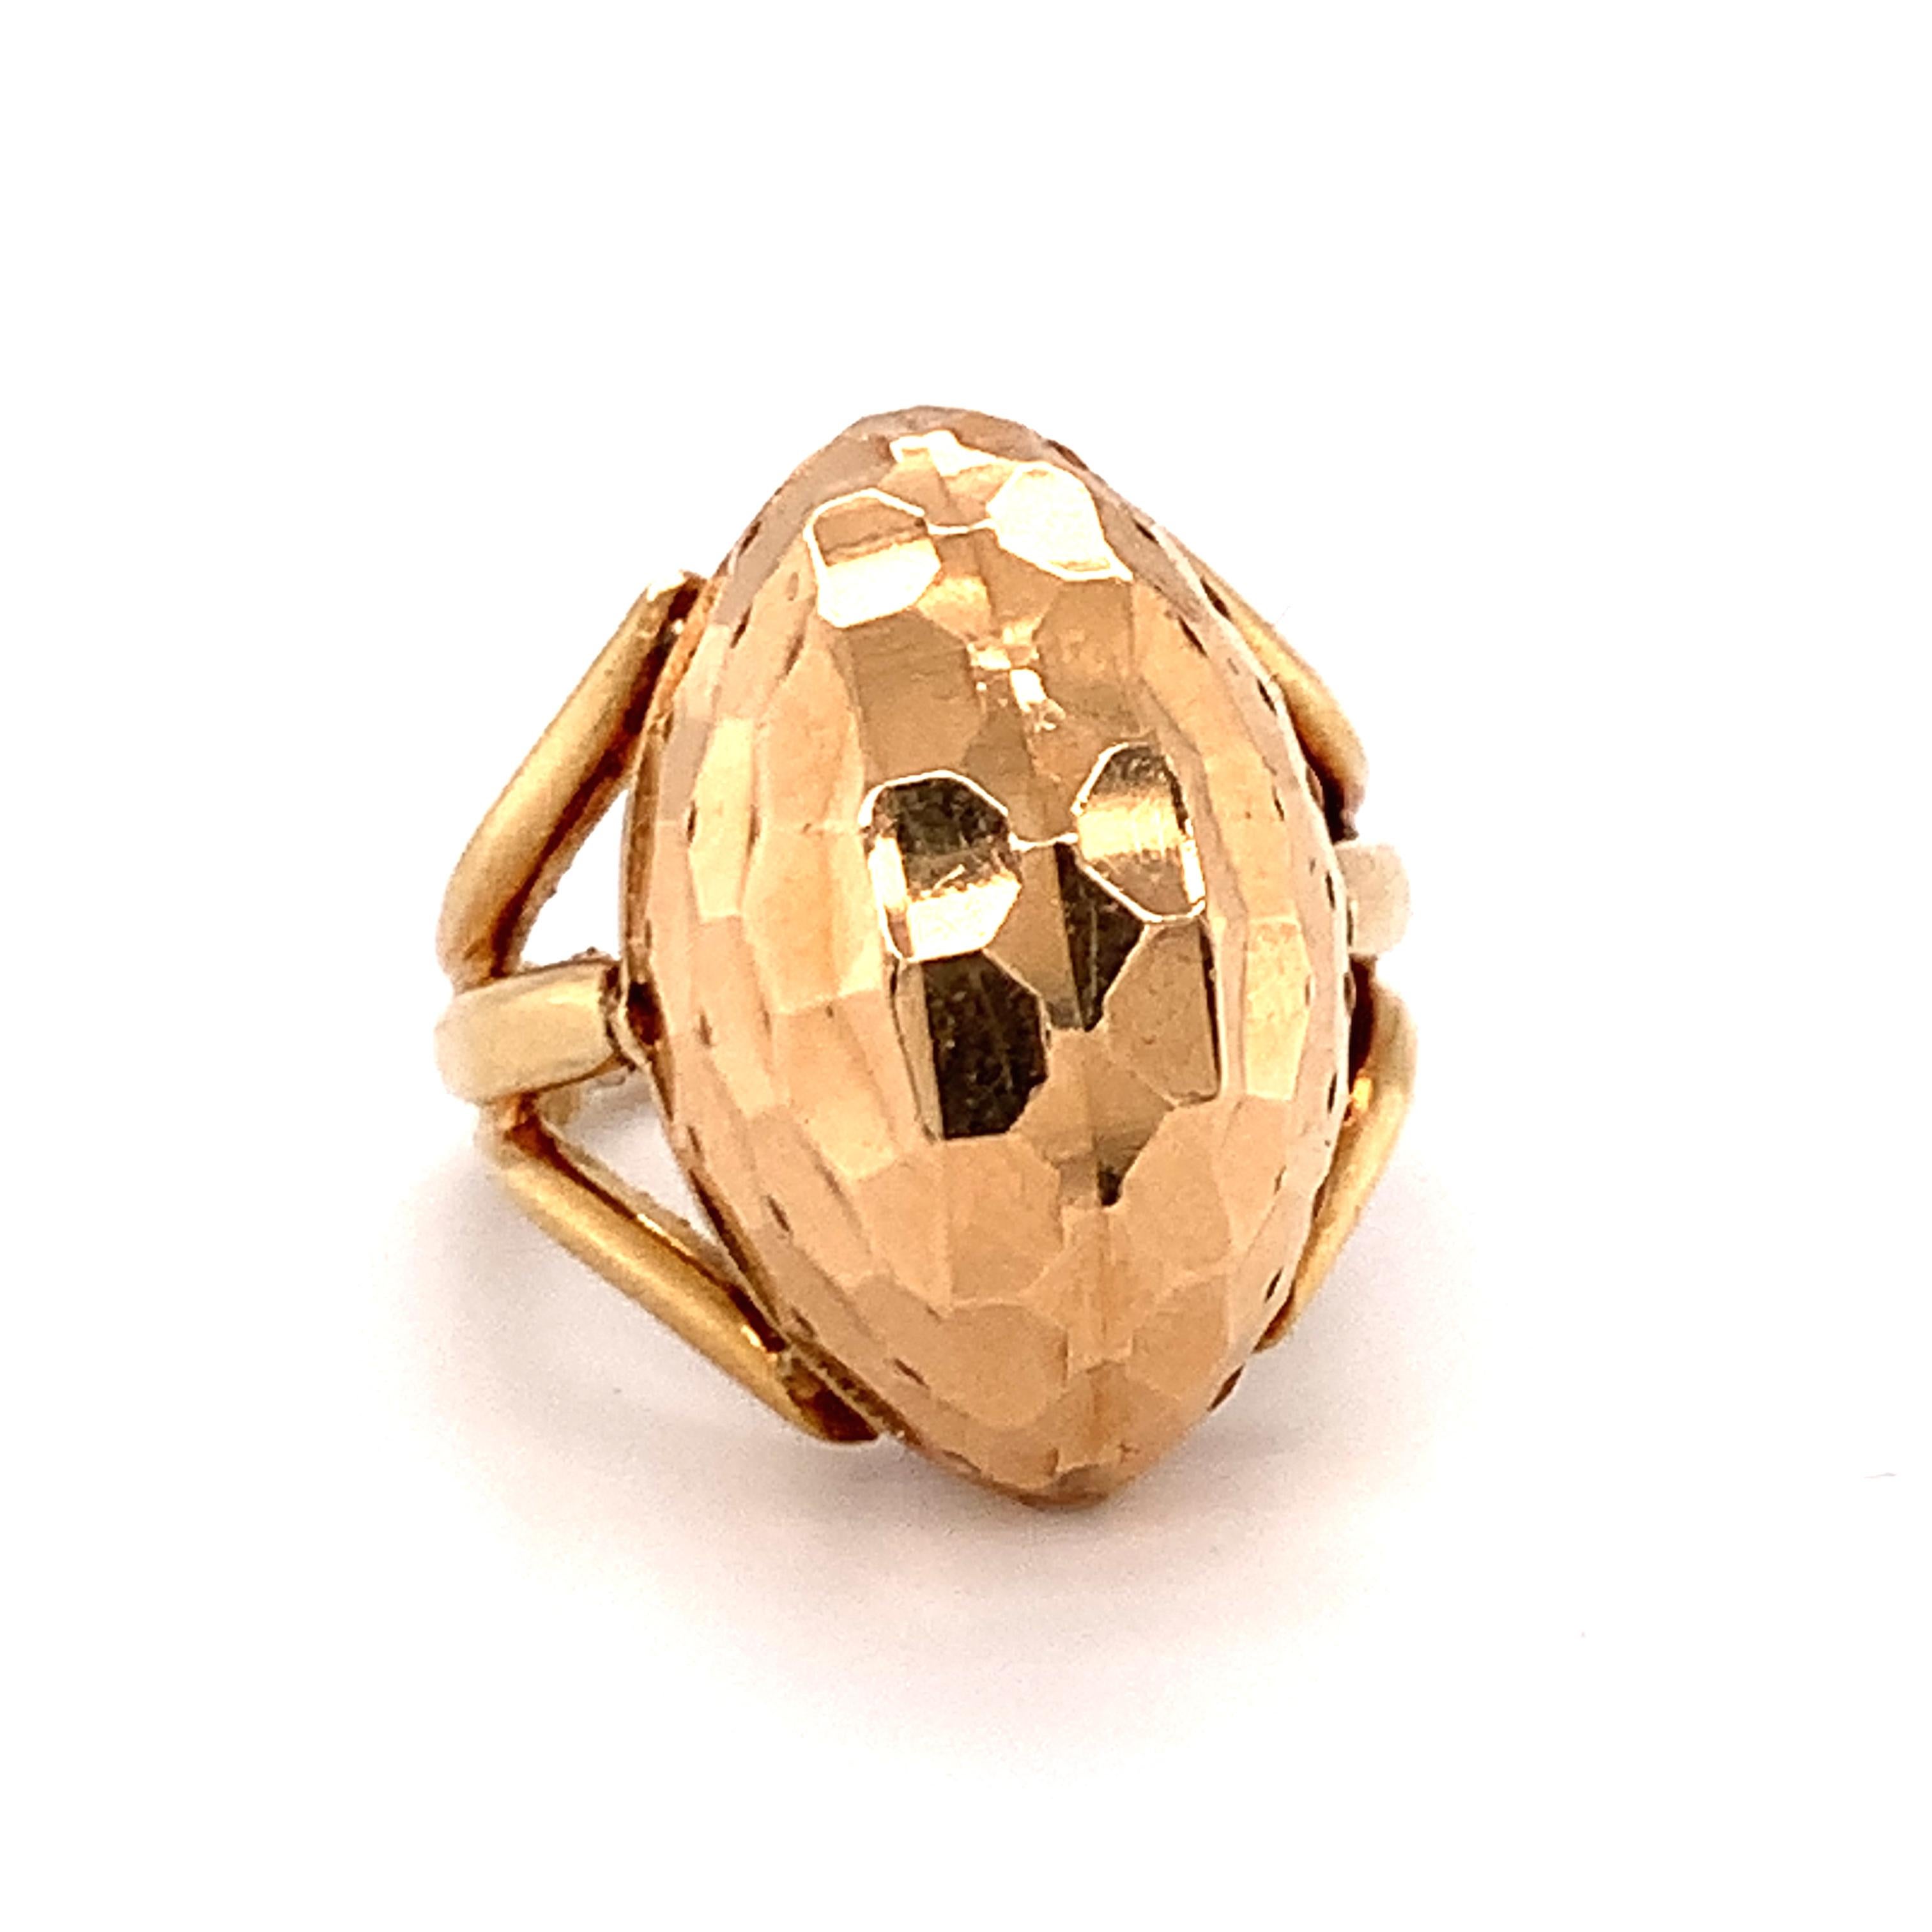 One Retro marquise-shaped hammered 18K rose gold ring with incredible dimension and sheen measuring 24 x 15 millimeters in size across the top portion and 13 millimeters high when worn upon the finger. The ring features open work shoulders split